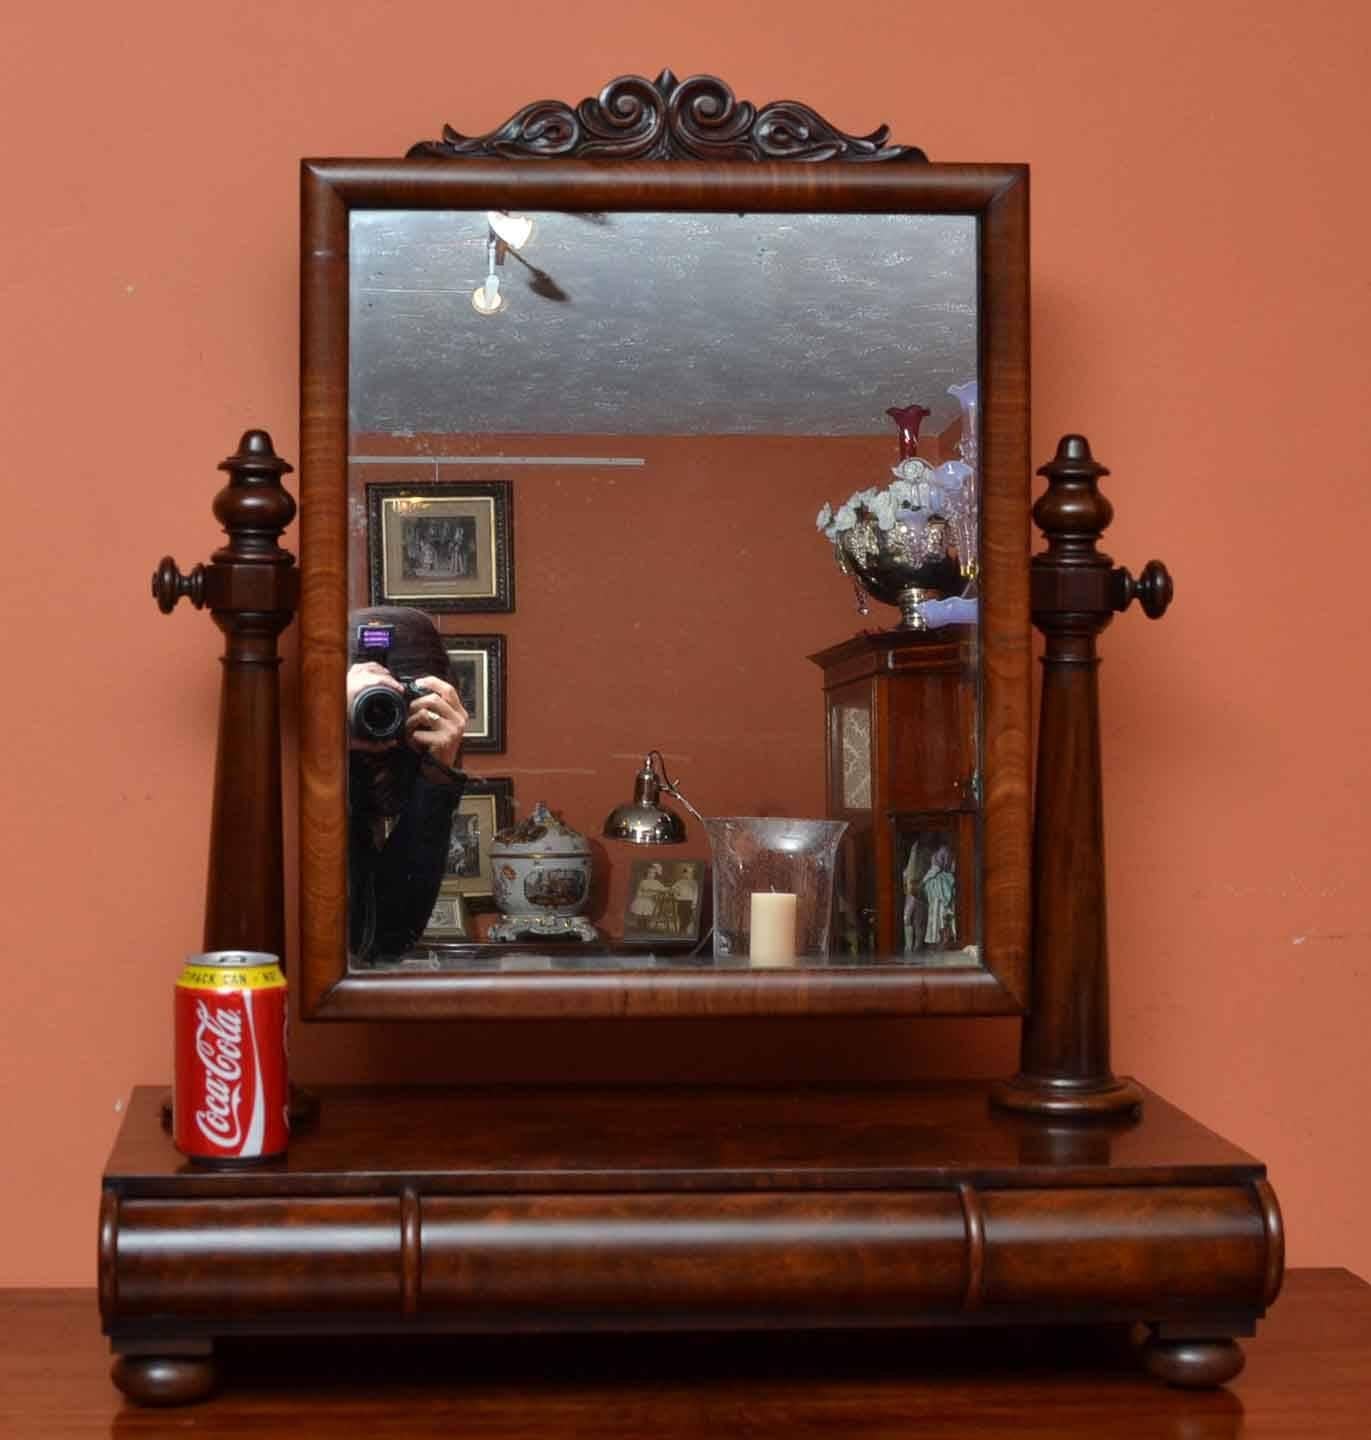 This is an antique English dressing table swivel mirror, circa 1840 in date. 

It is made from flame mahogany and has a useful drawer underneath for storing your brushes and combs. The mirror has hand carved floral decorations to the pediment.